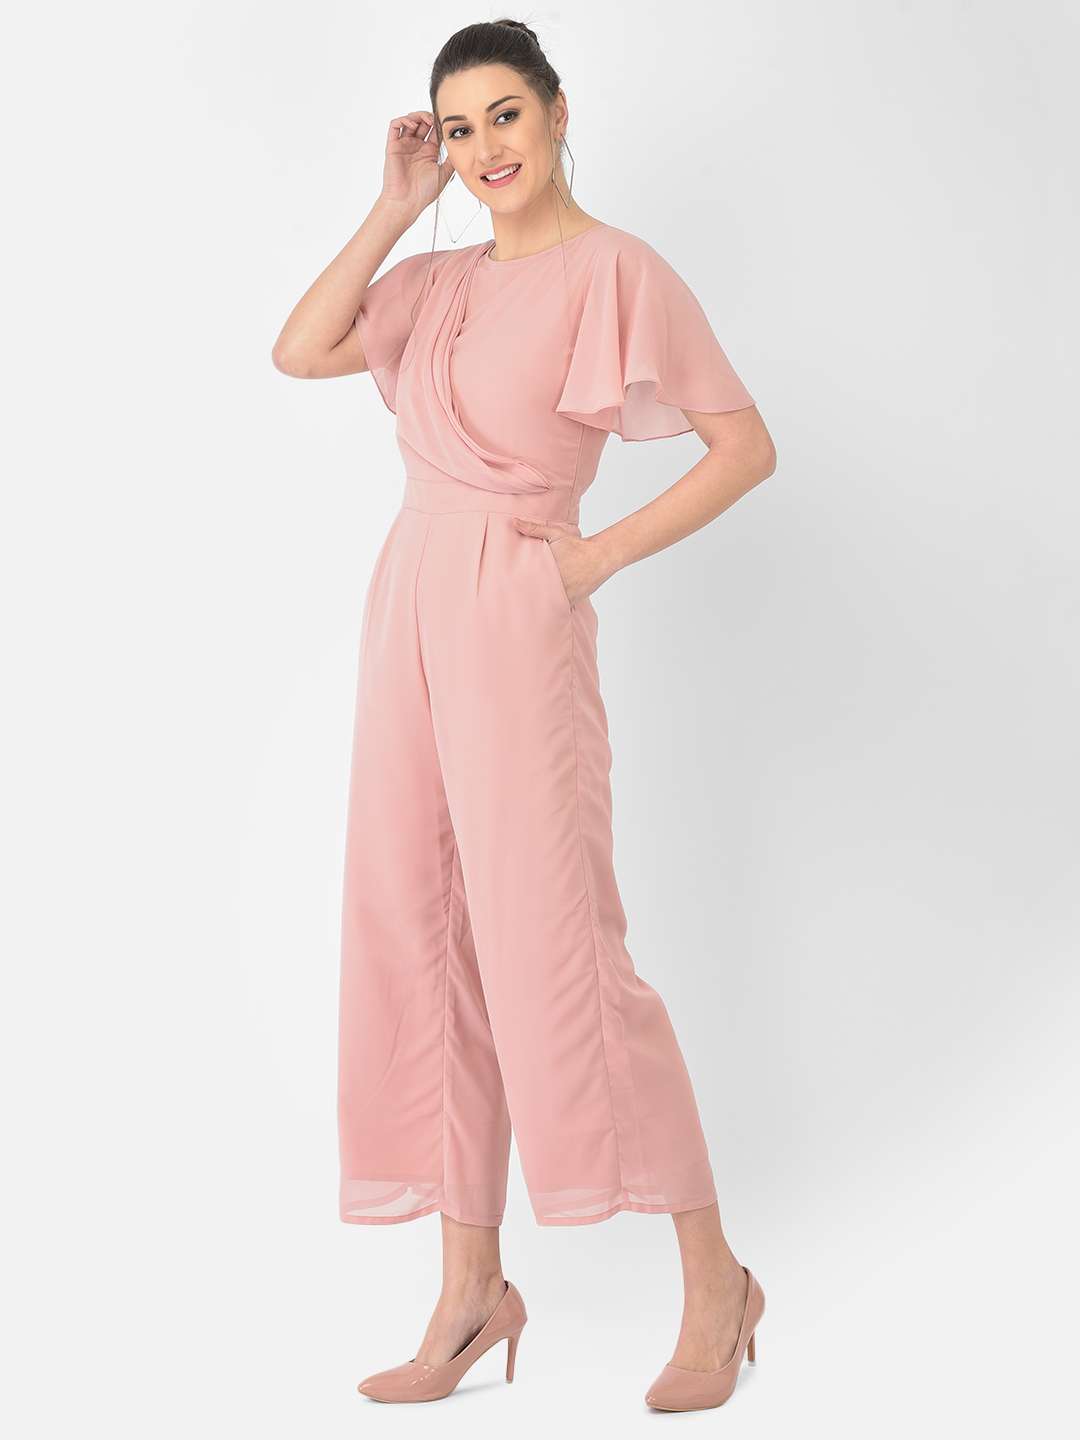 A Pink Corduroy Jumpsuit Styled With White Boots - Not Dressed As Lamb